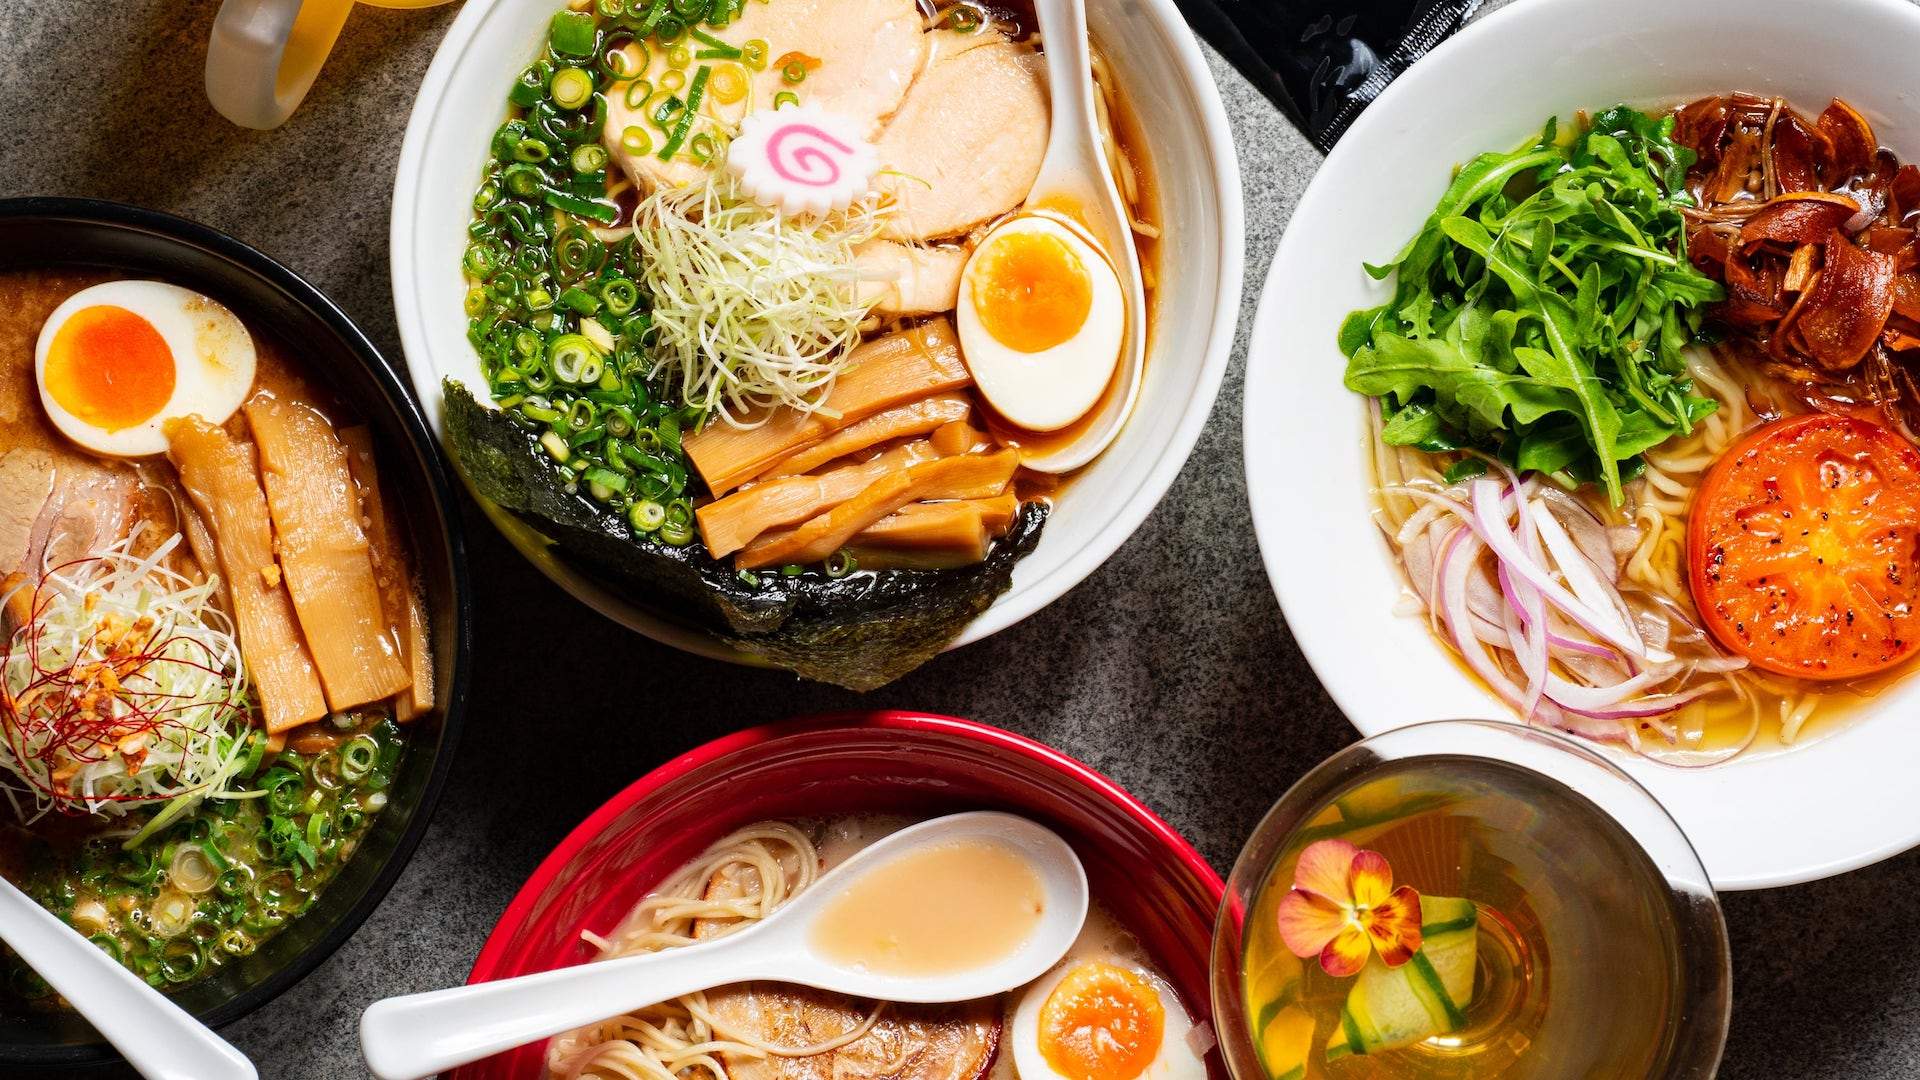 Where to Get the Best Ramen in Melbourne